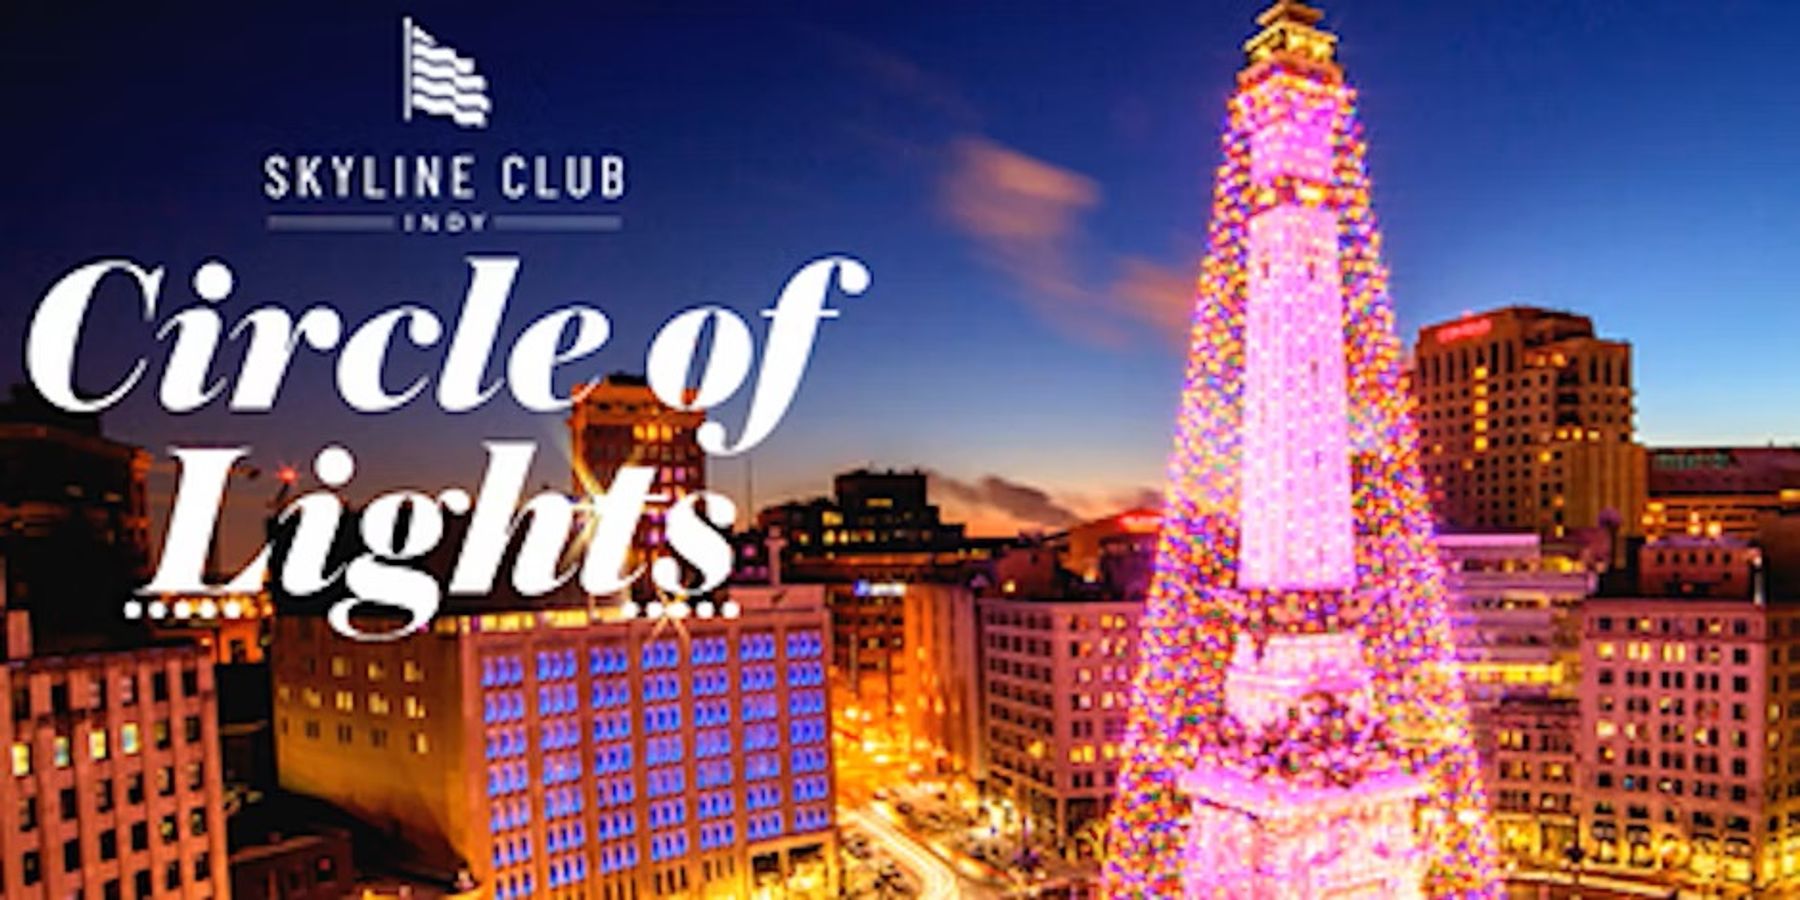 Skyline Indy Presents Circle of Lights! Downtown Indianapolis